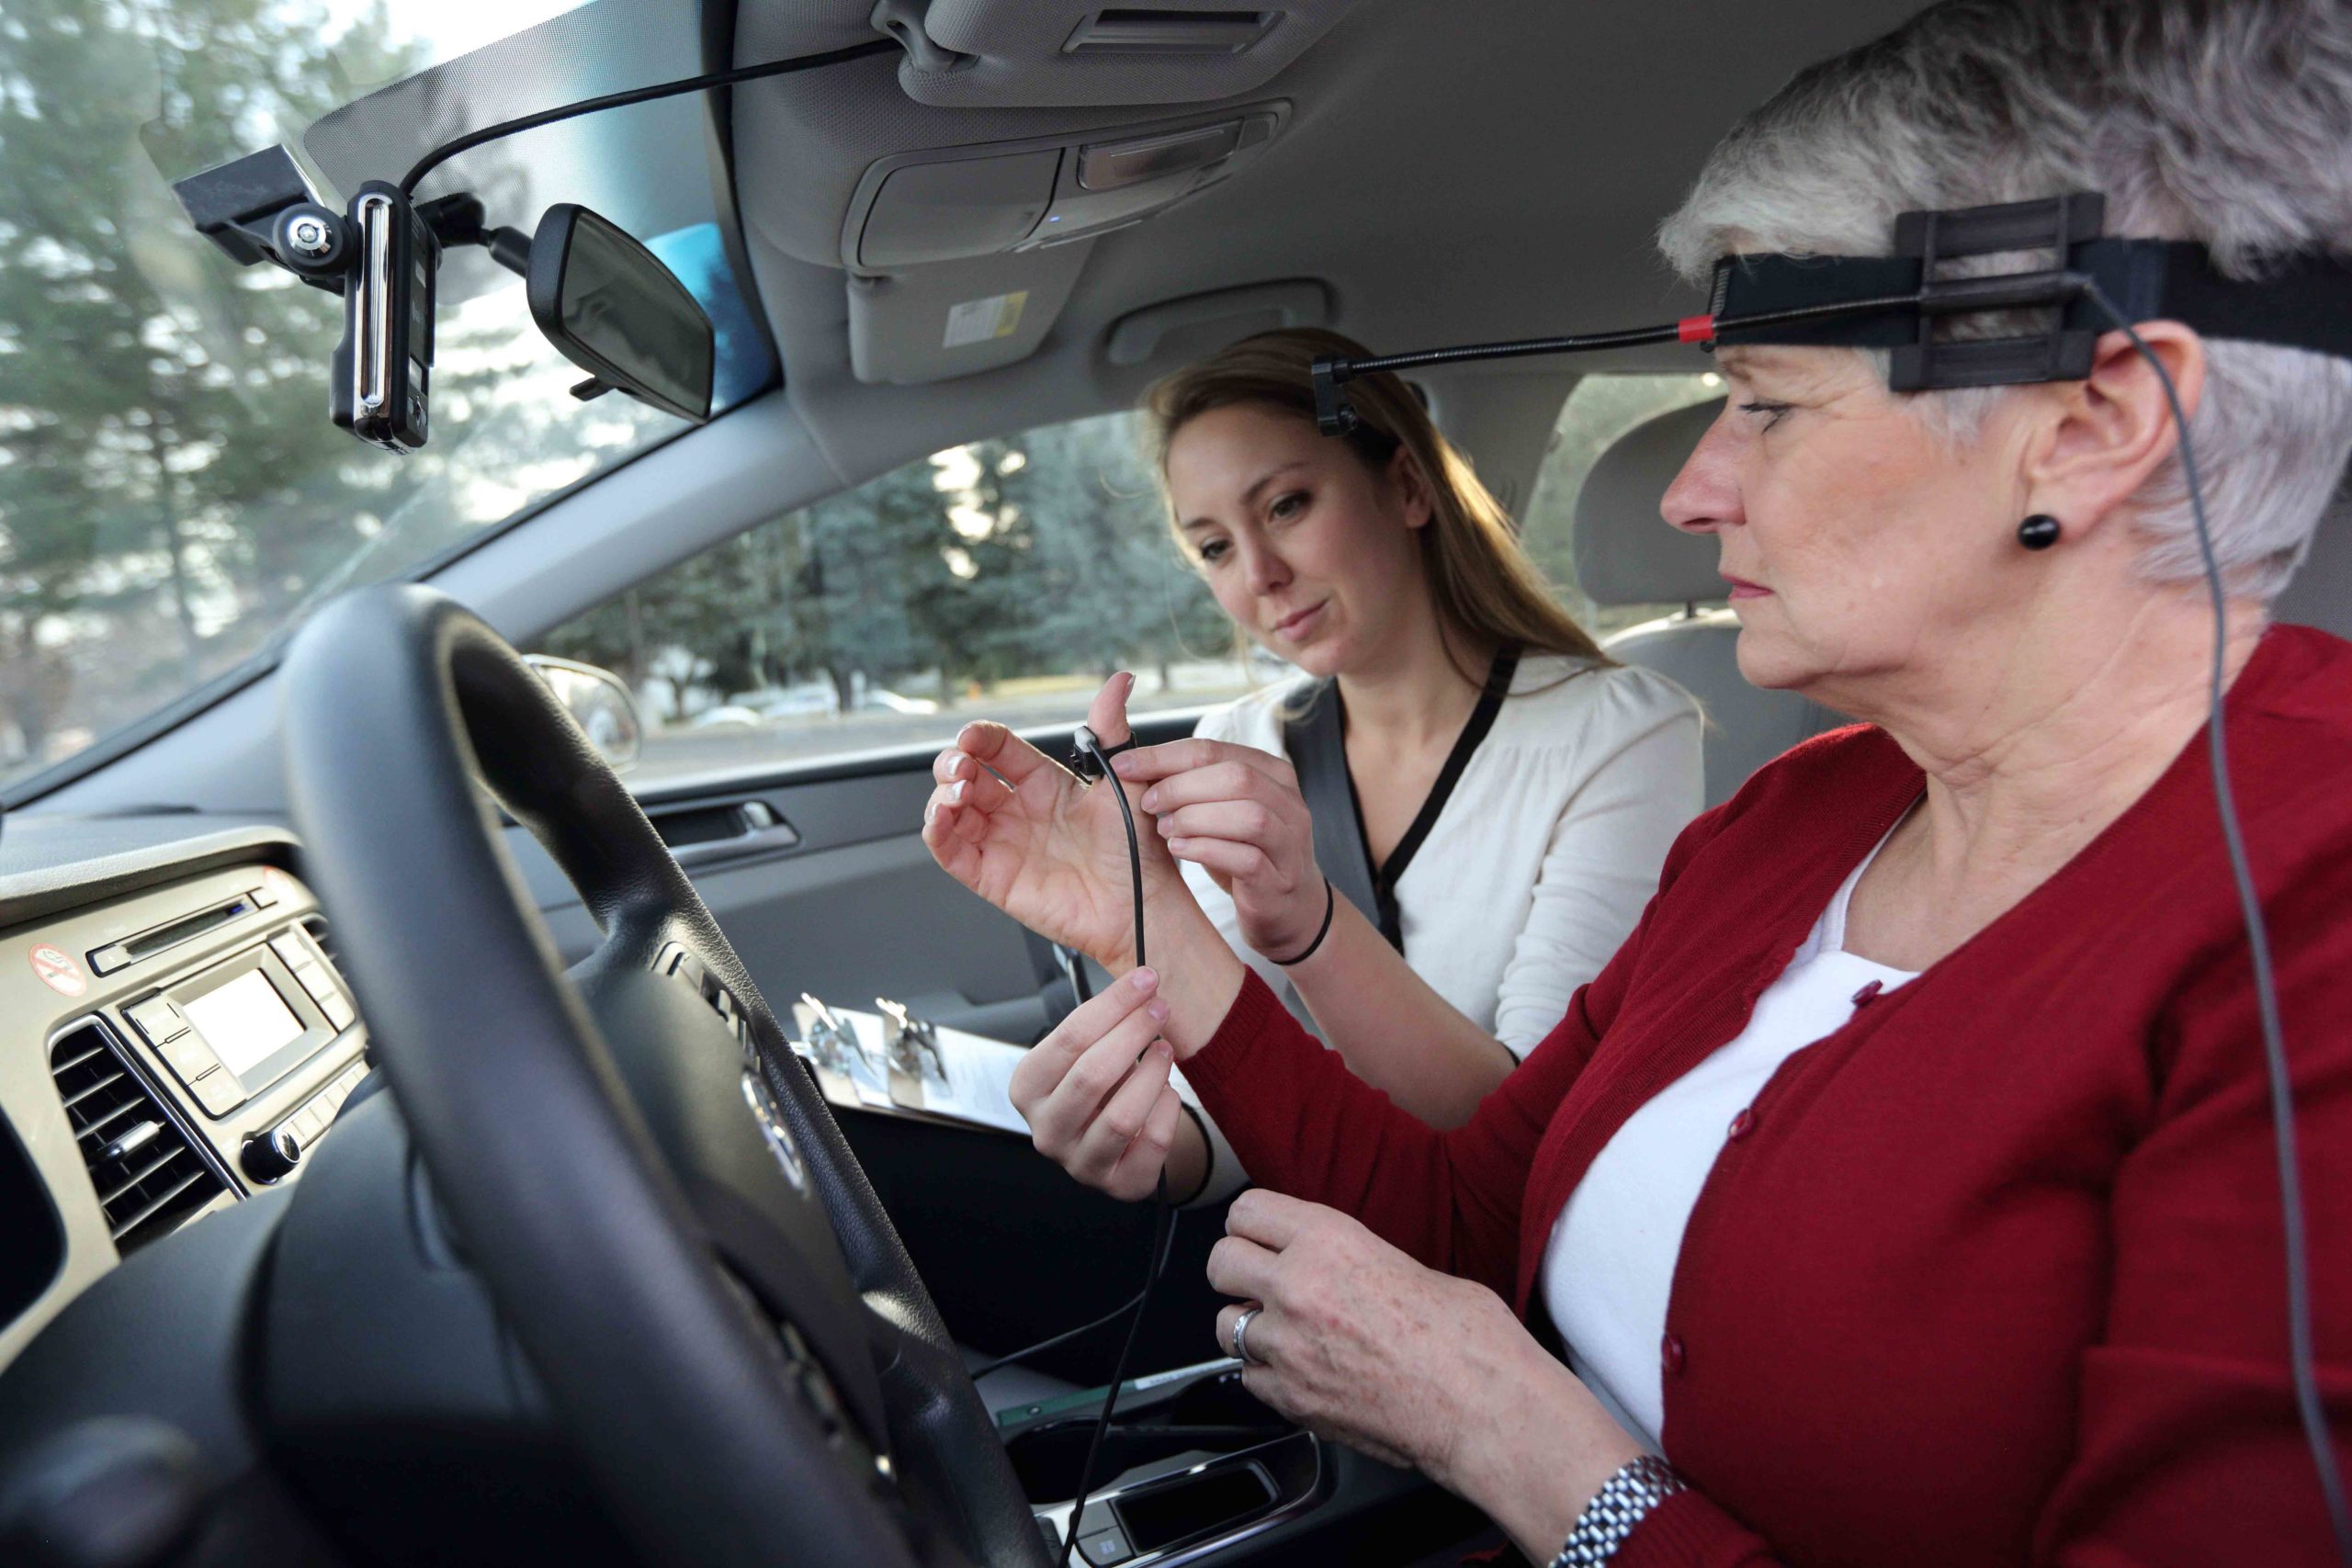 The Voice-Control System You Use In The Car Is Way More Distracting Than You Think